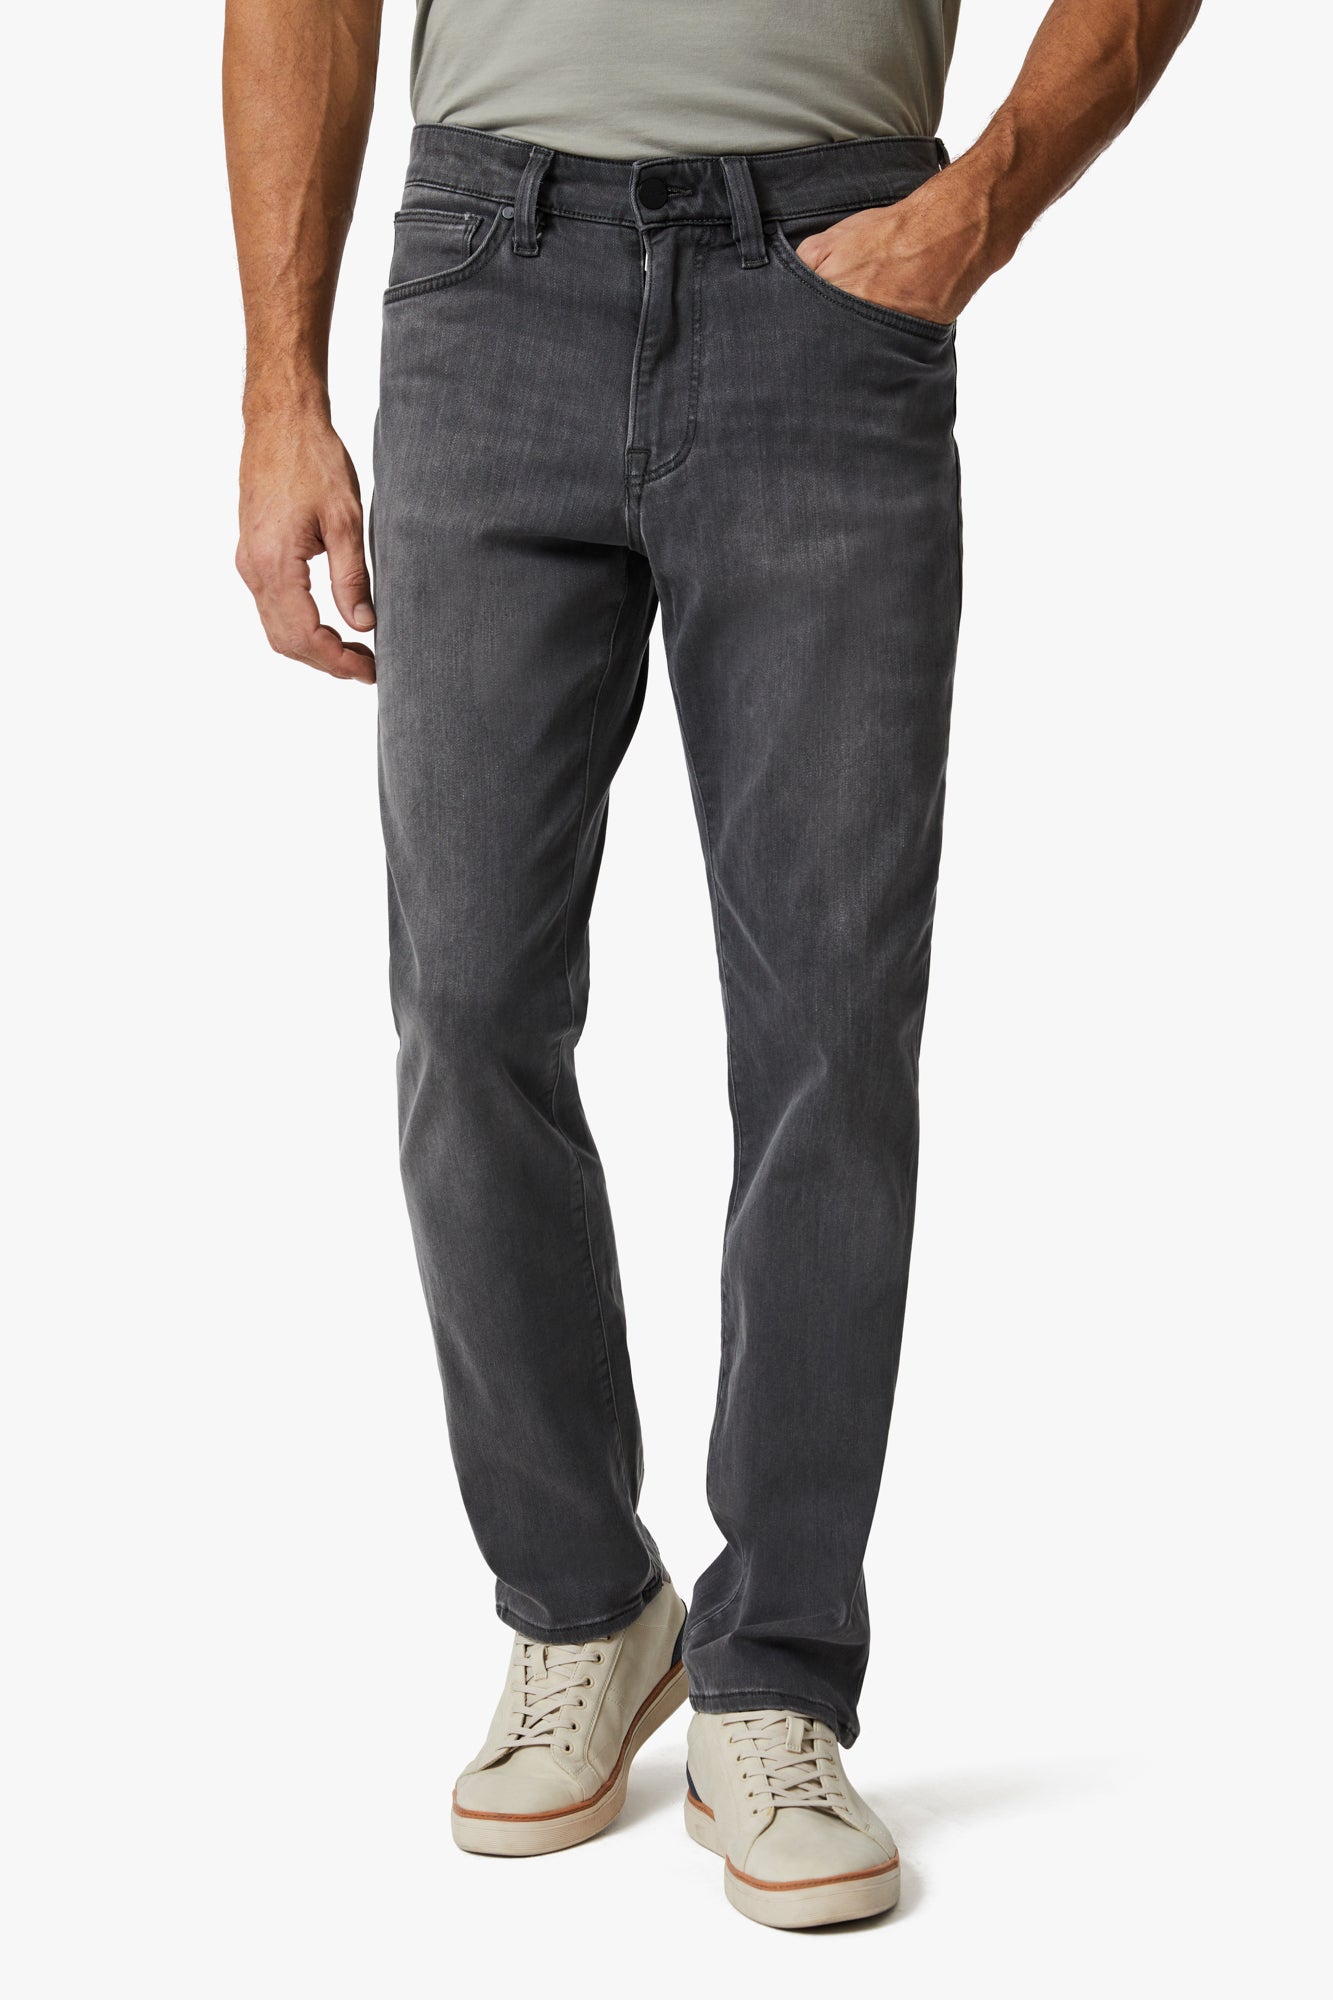 Charisma Relaxed Straight Jeans In Mid Grey Urban Image 1